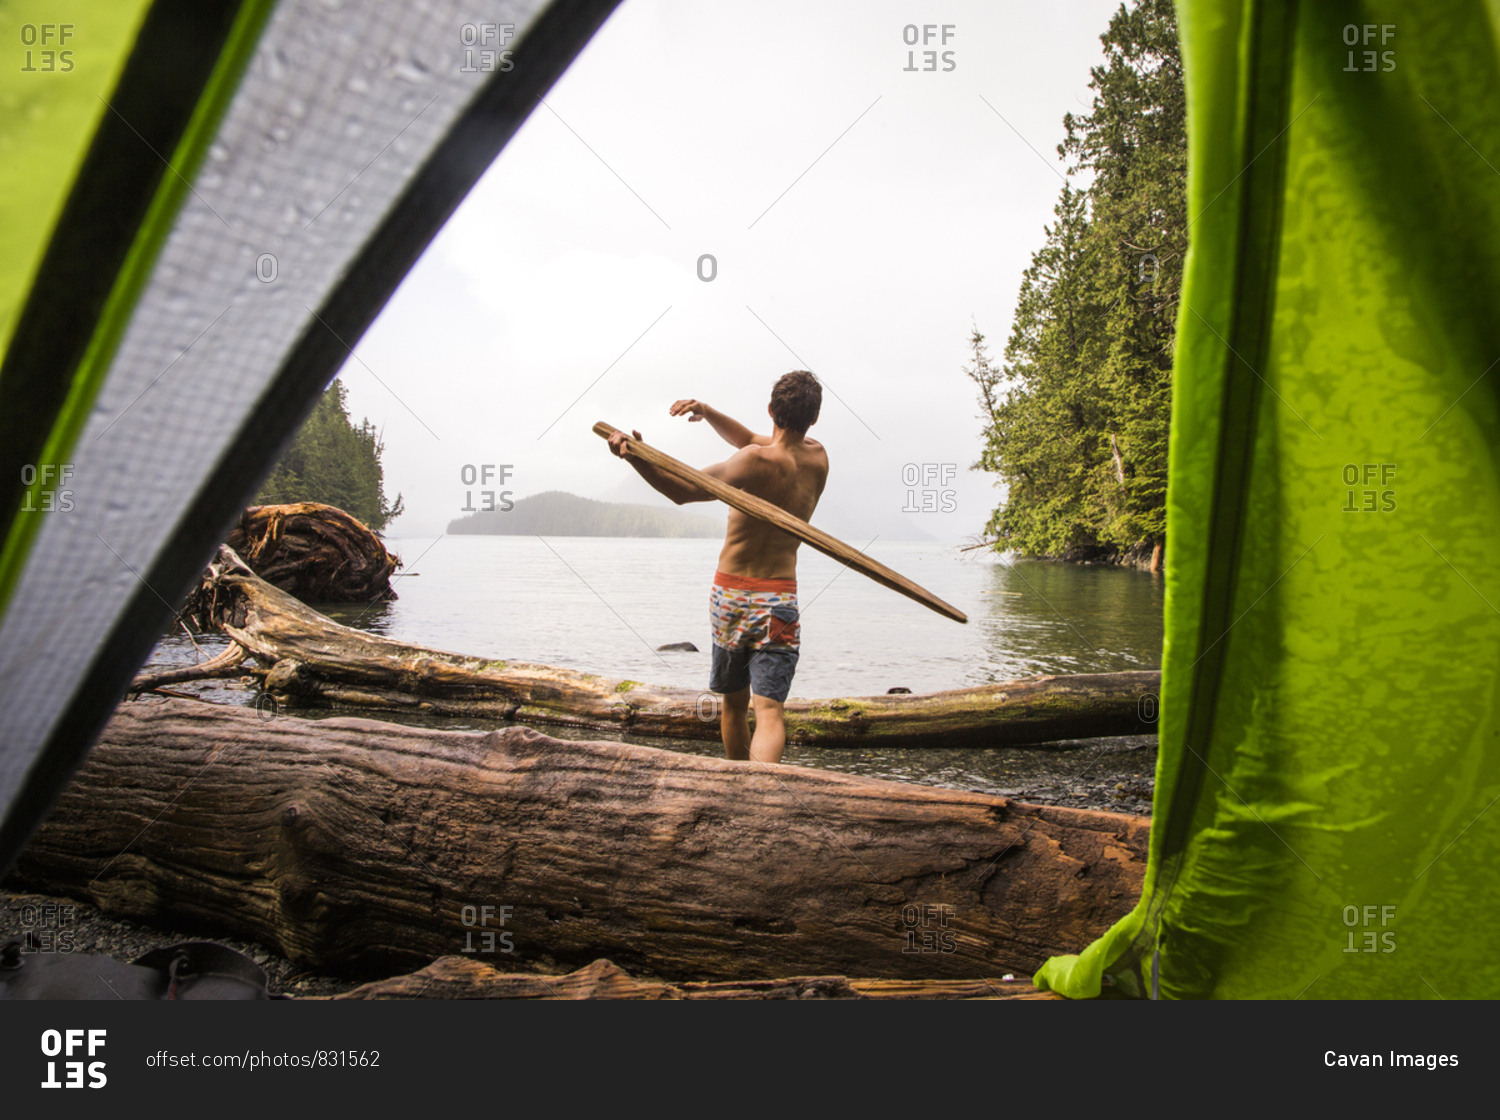 KLEMTU, BRITISH COLUMBIA, CANADA. A shirtless man swings a large stick like a baseball bat on a remote beach, as seen through the opening in a green tent door.